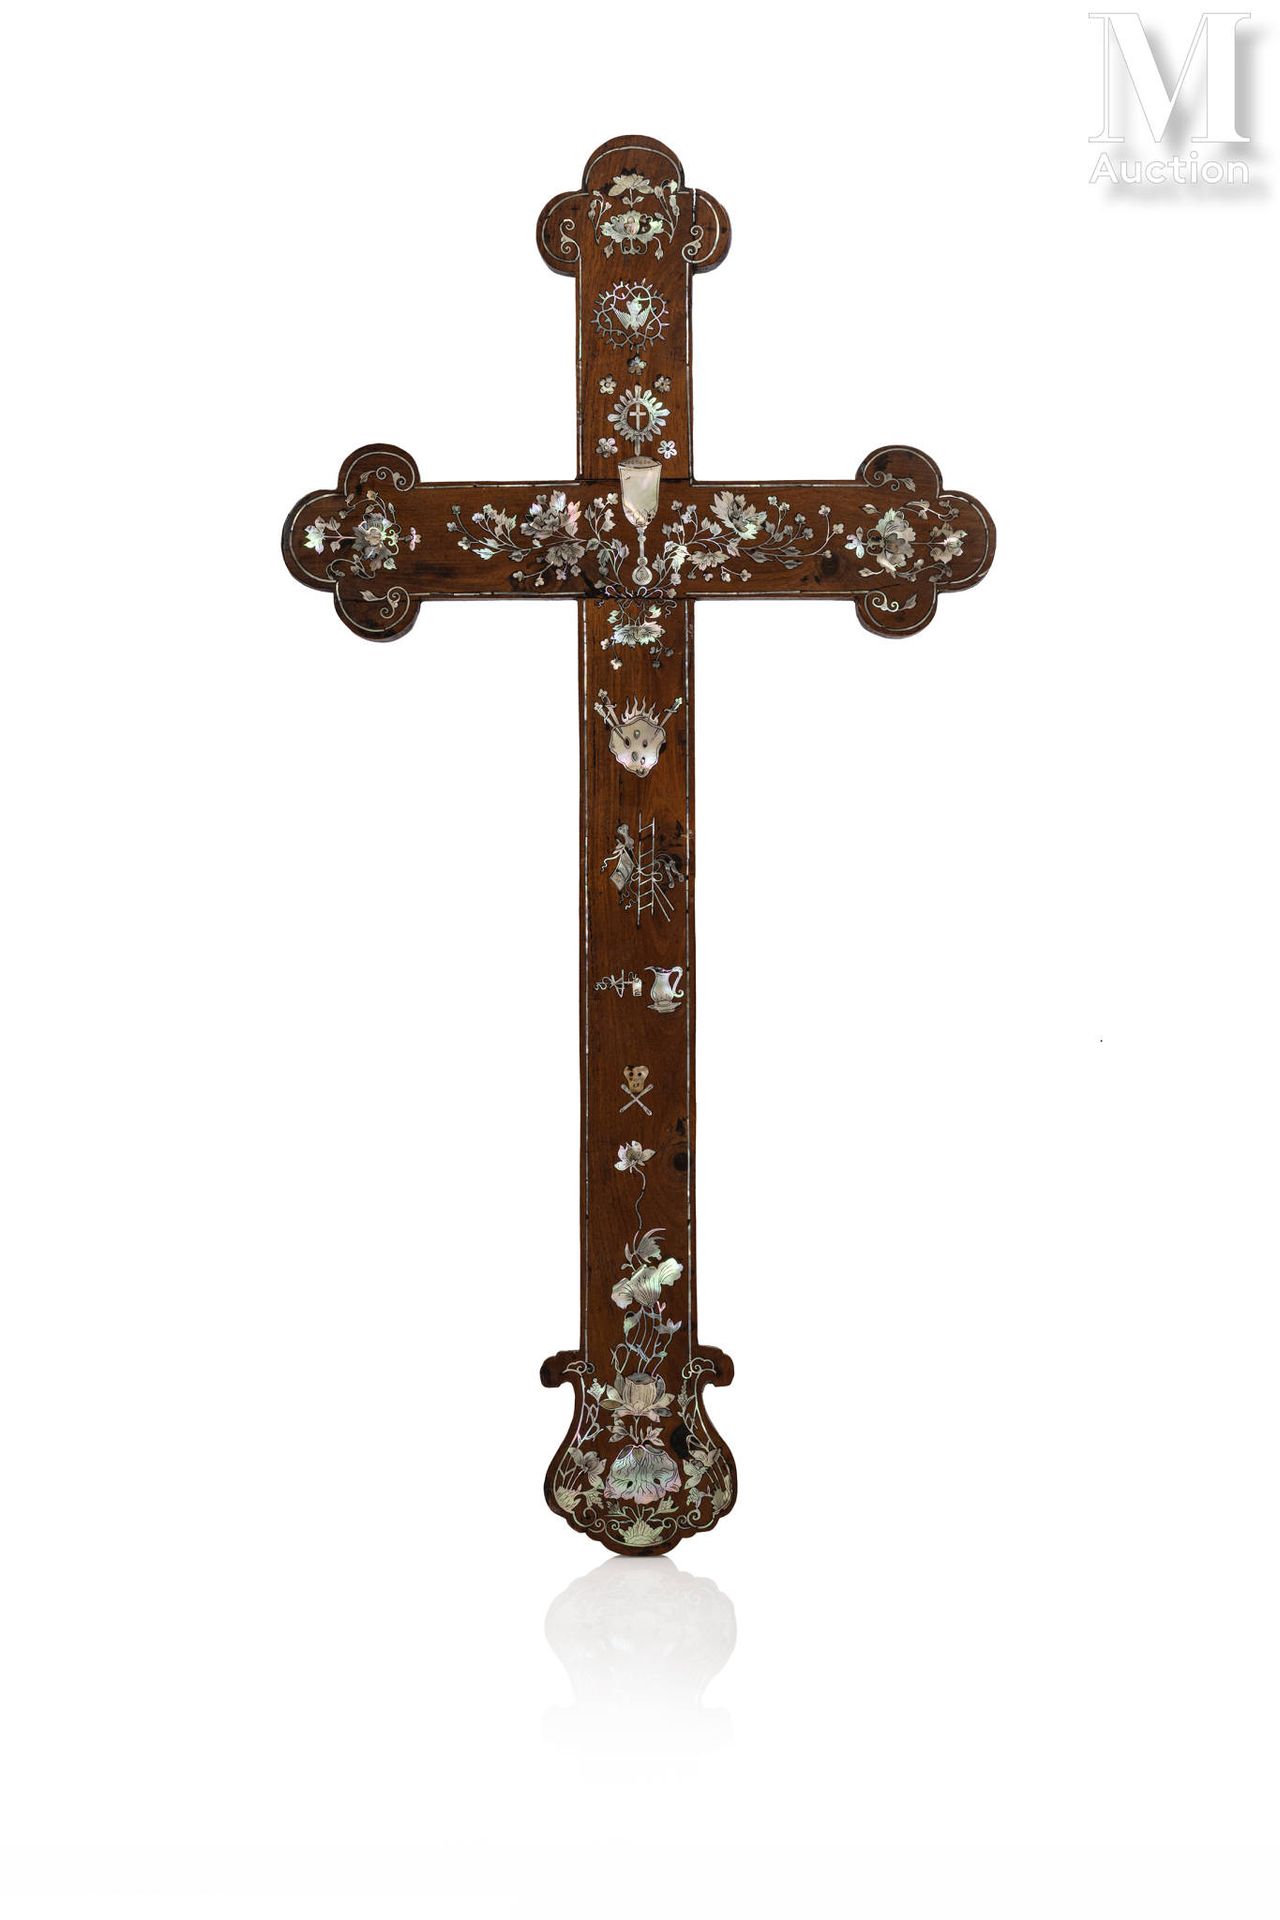 CHINE DU SUD, XIXe siècle Christian cross

in natural wood decorated with mother&hellip;